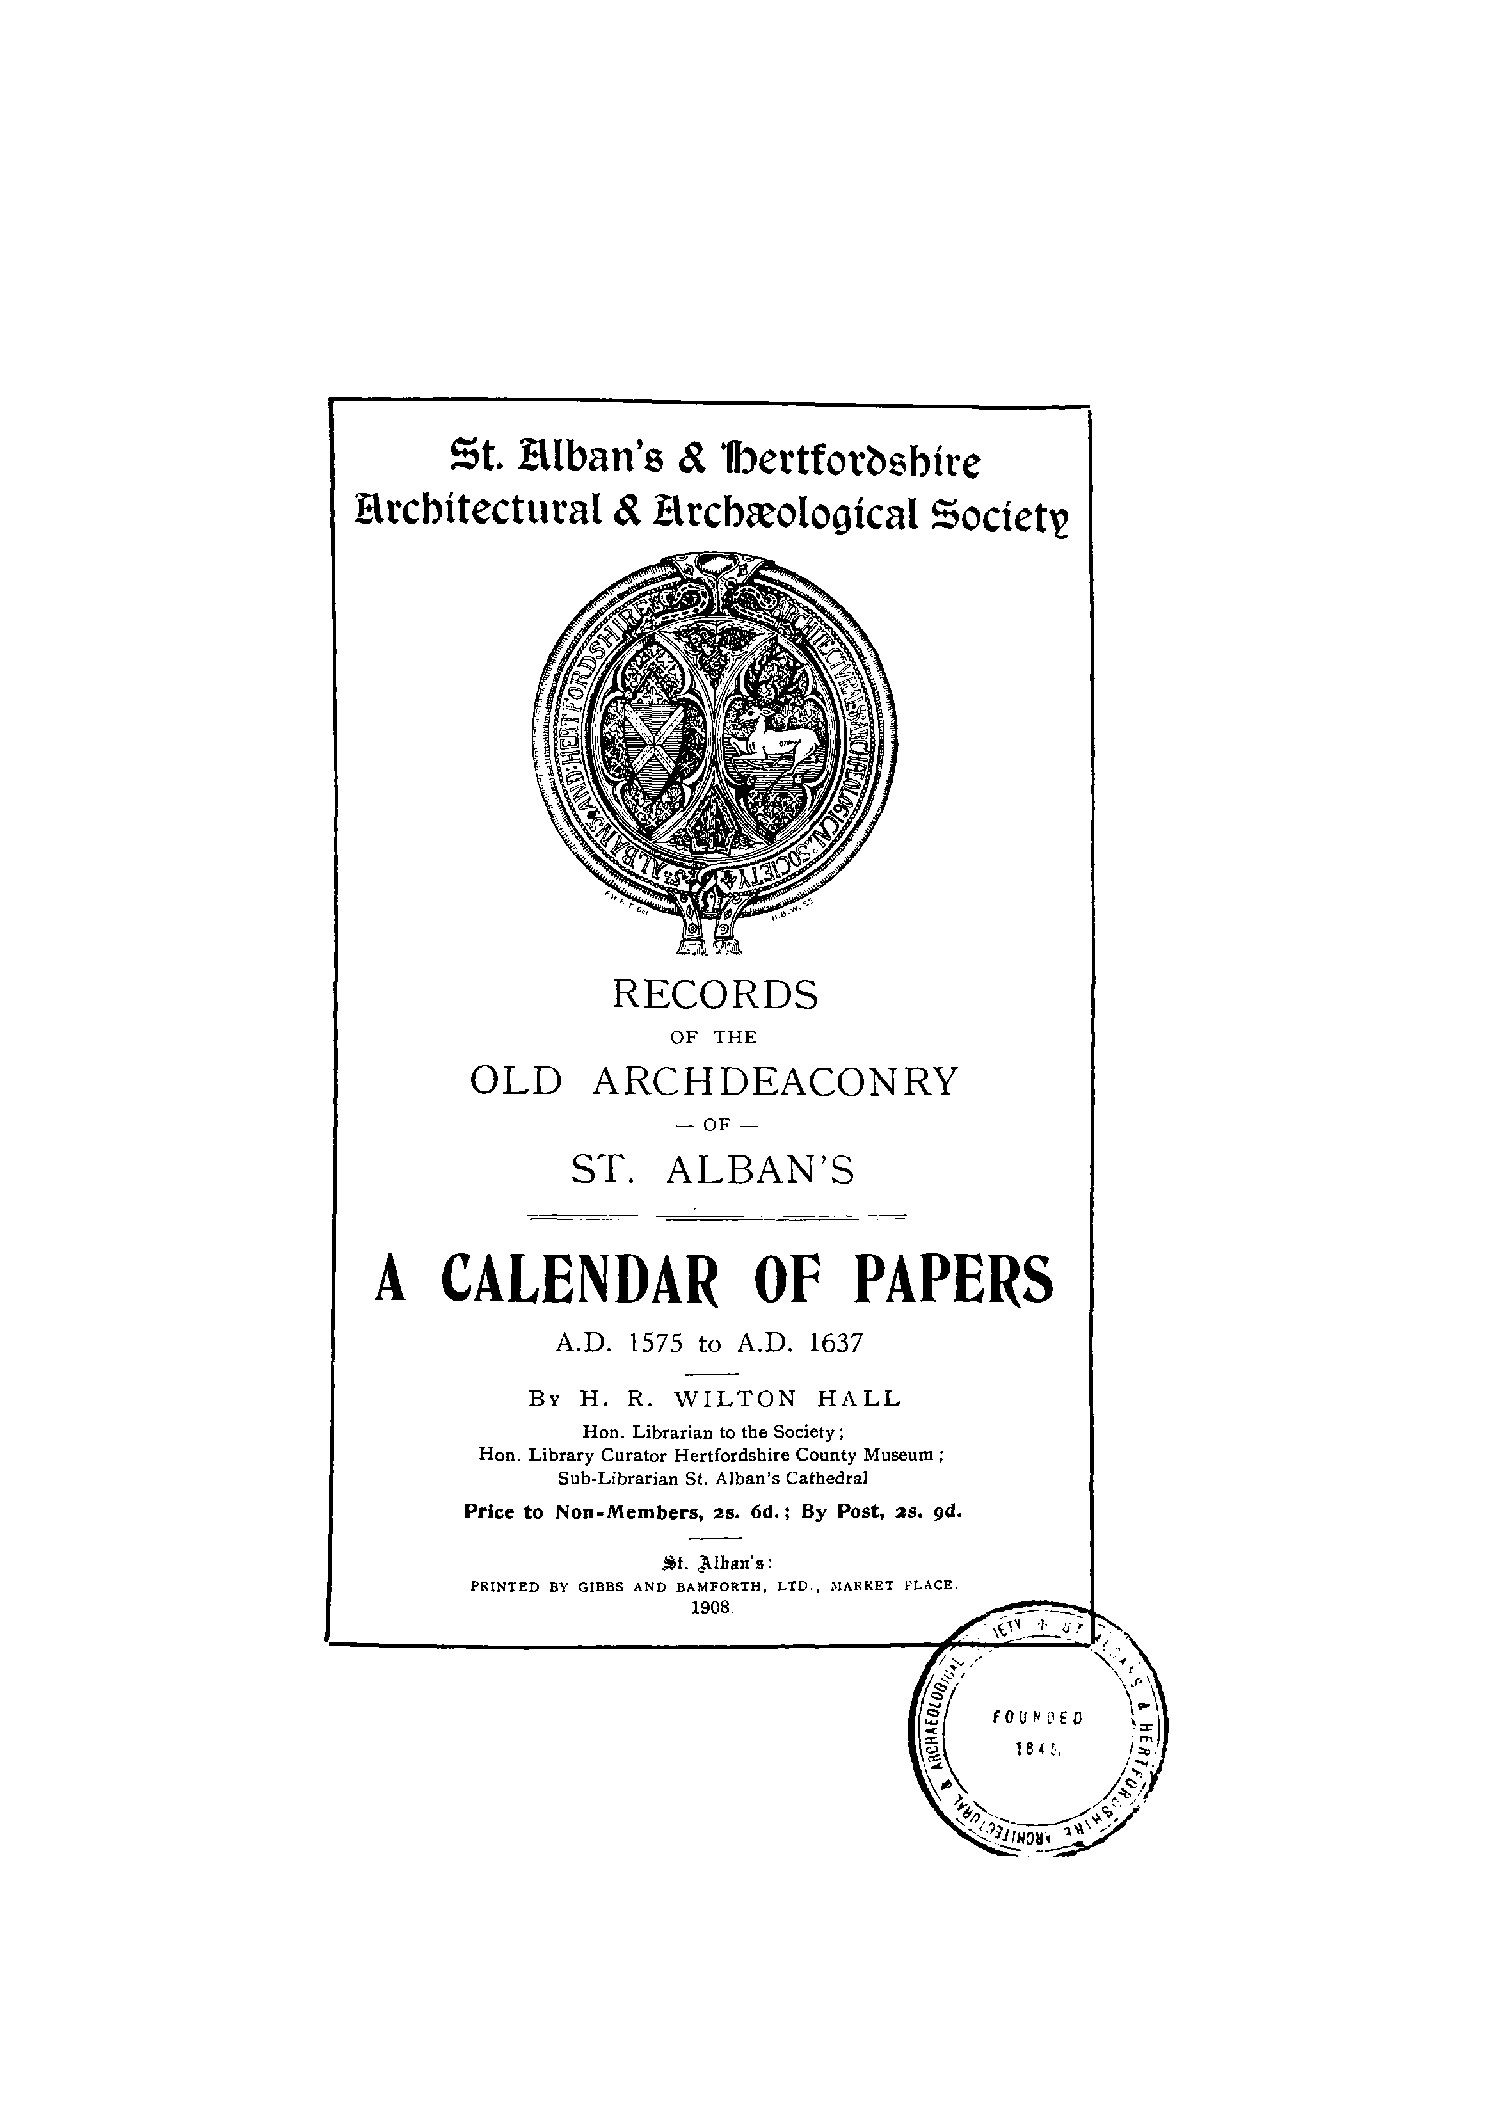 Early publications: Records of the Old Archdeaconry  of St. Alban's